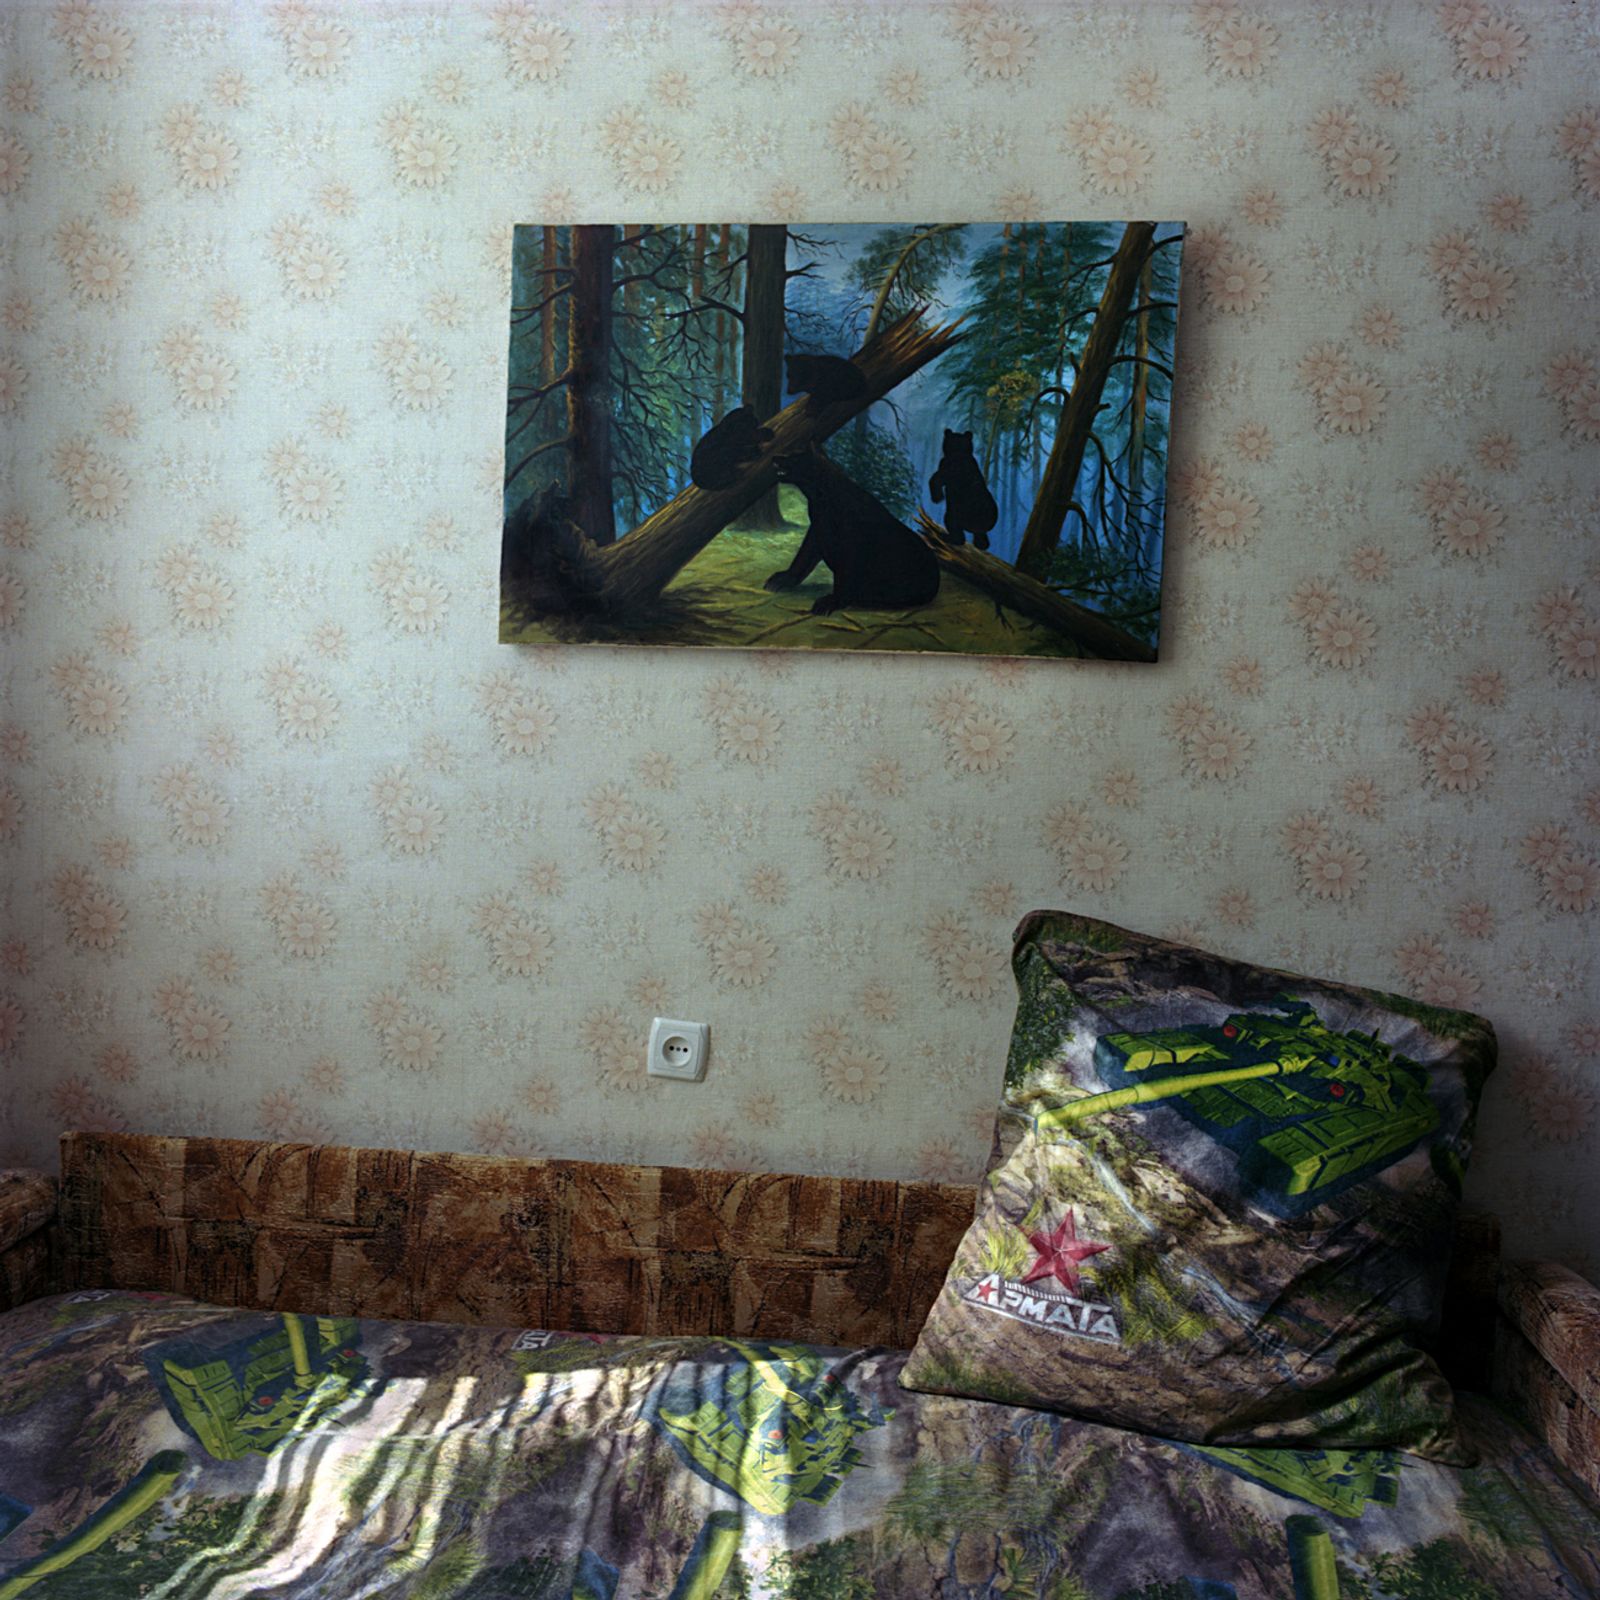 © Jorge Monaco - Image from the Transnistria, the country that doesn’t exist photography project